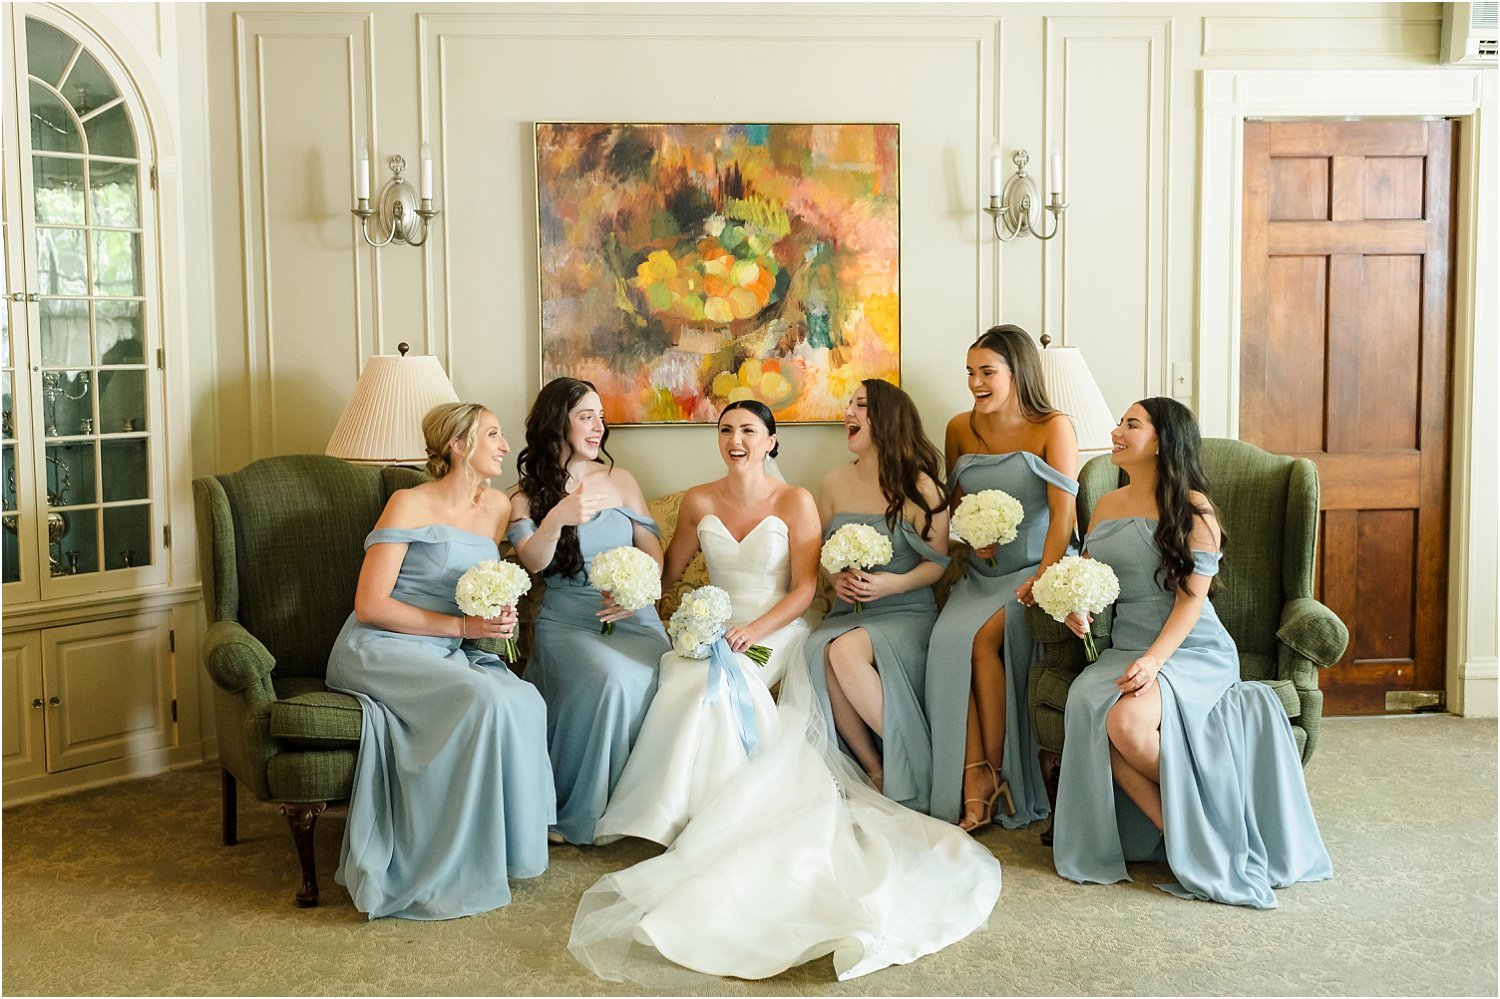  A bride and her bridesmaids sit in the Ann Arbor City Club and have a fun moment before the wedding ceremony.  